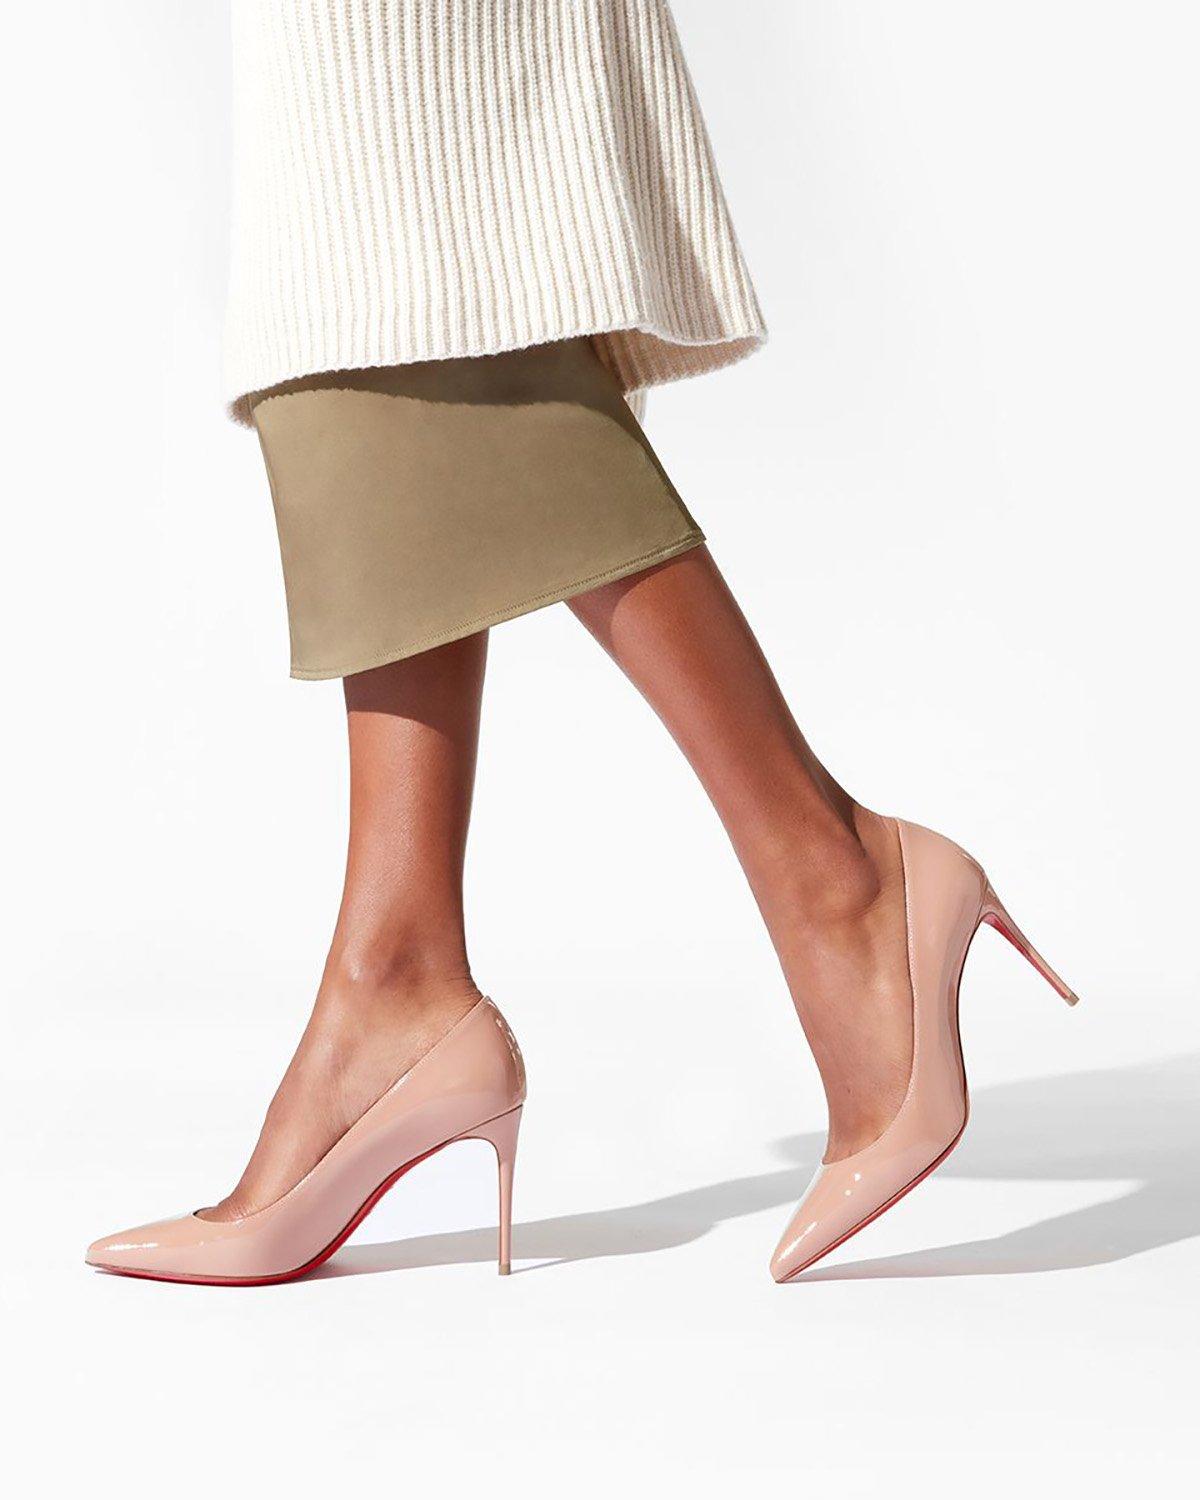 Christian Louboutin Nude 6248 Pigalle 85 Patent Calf 35.5 in Beige (Natural) - 34% - Lyst